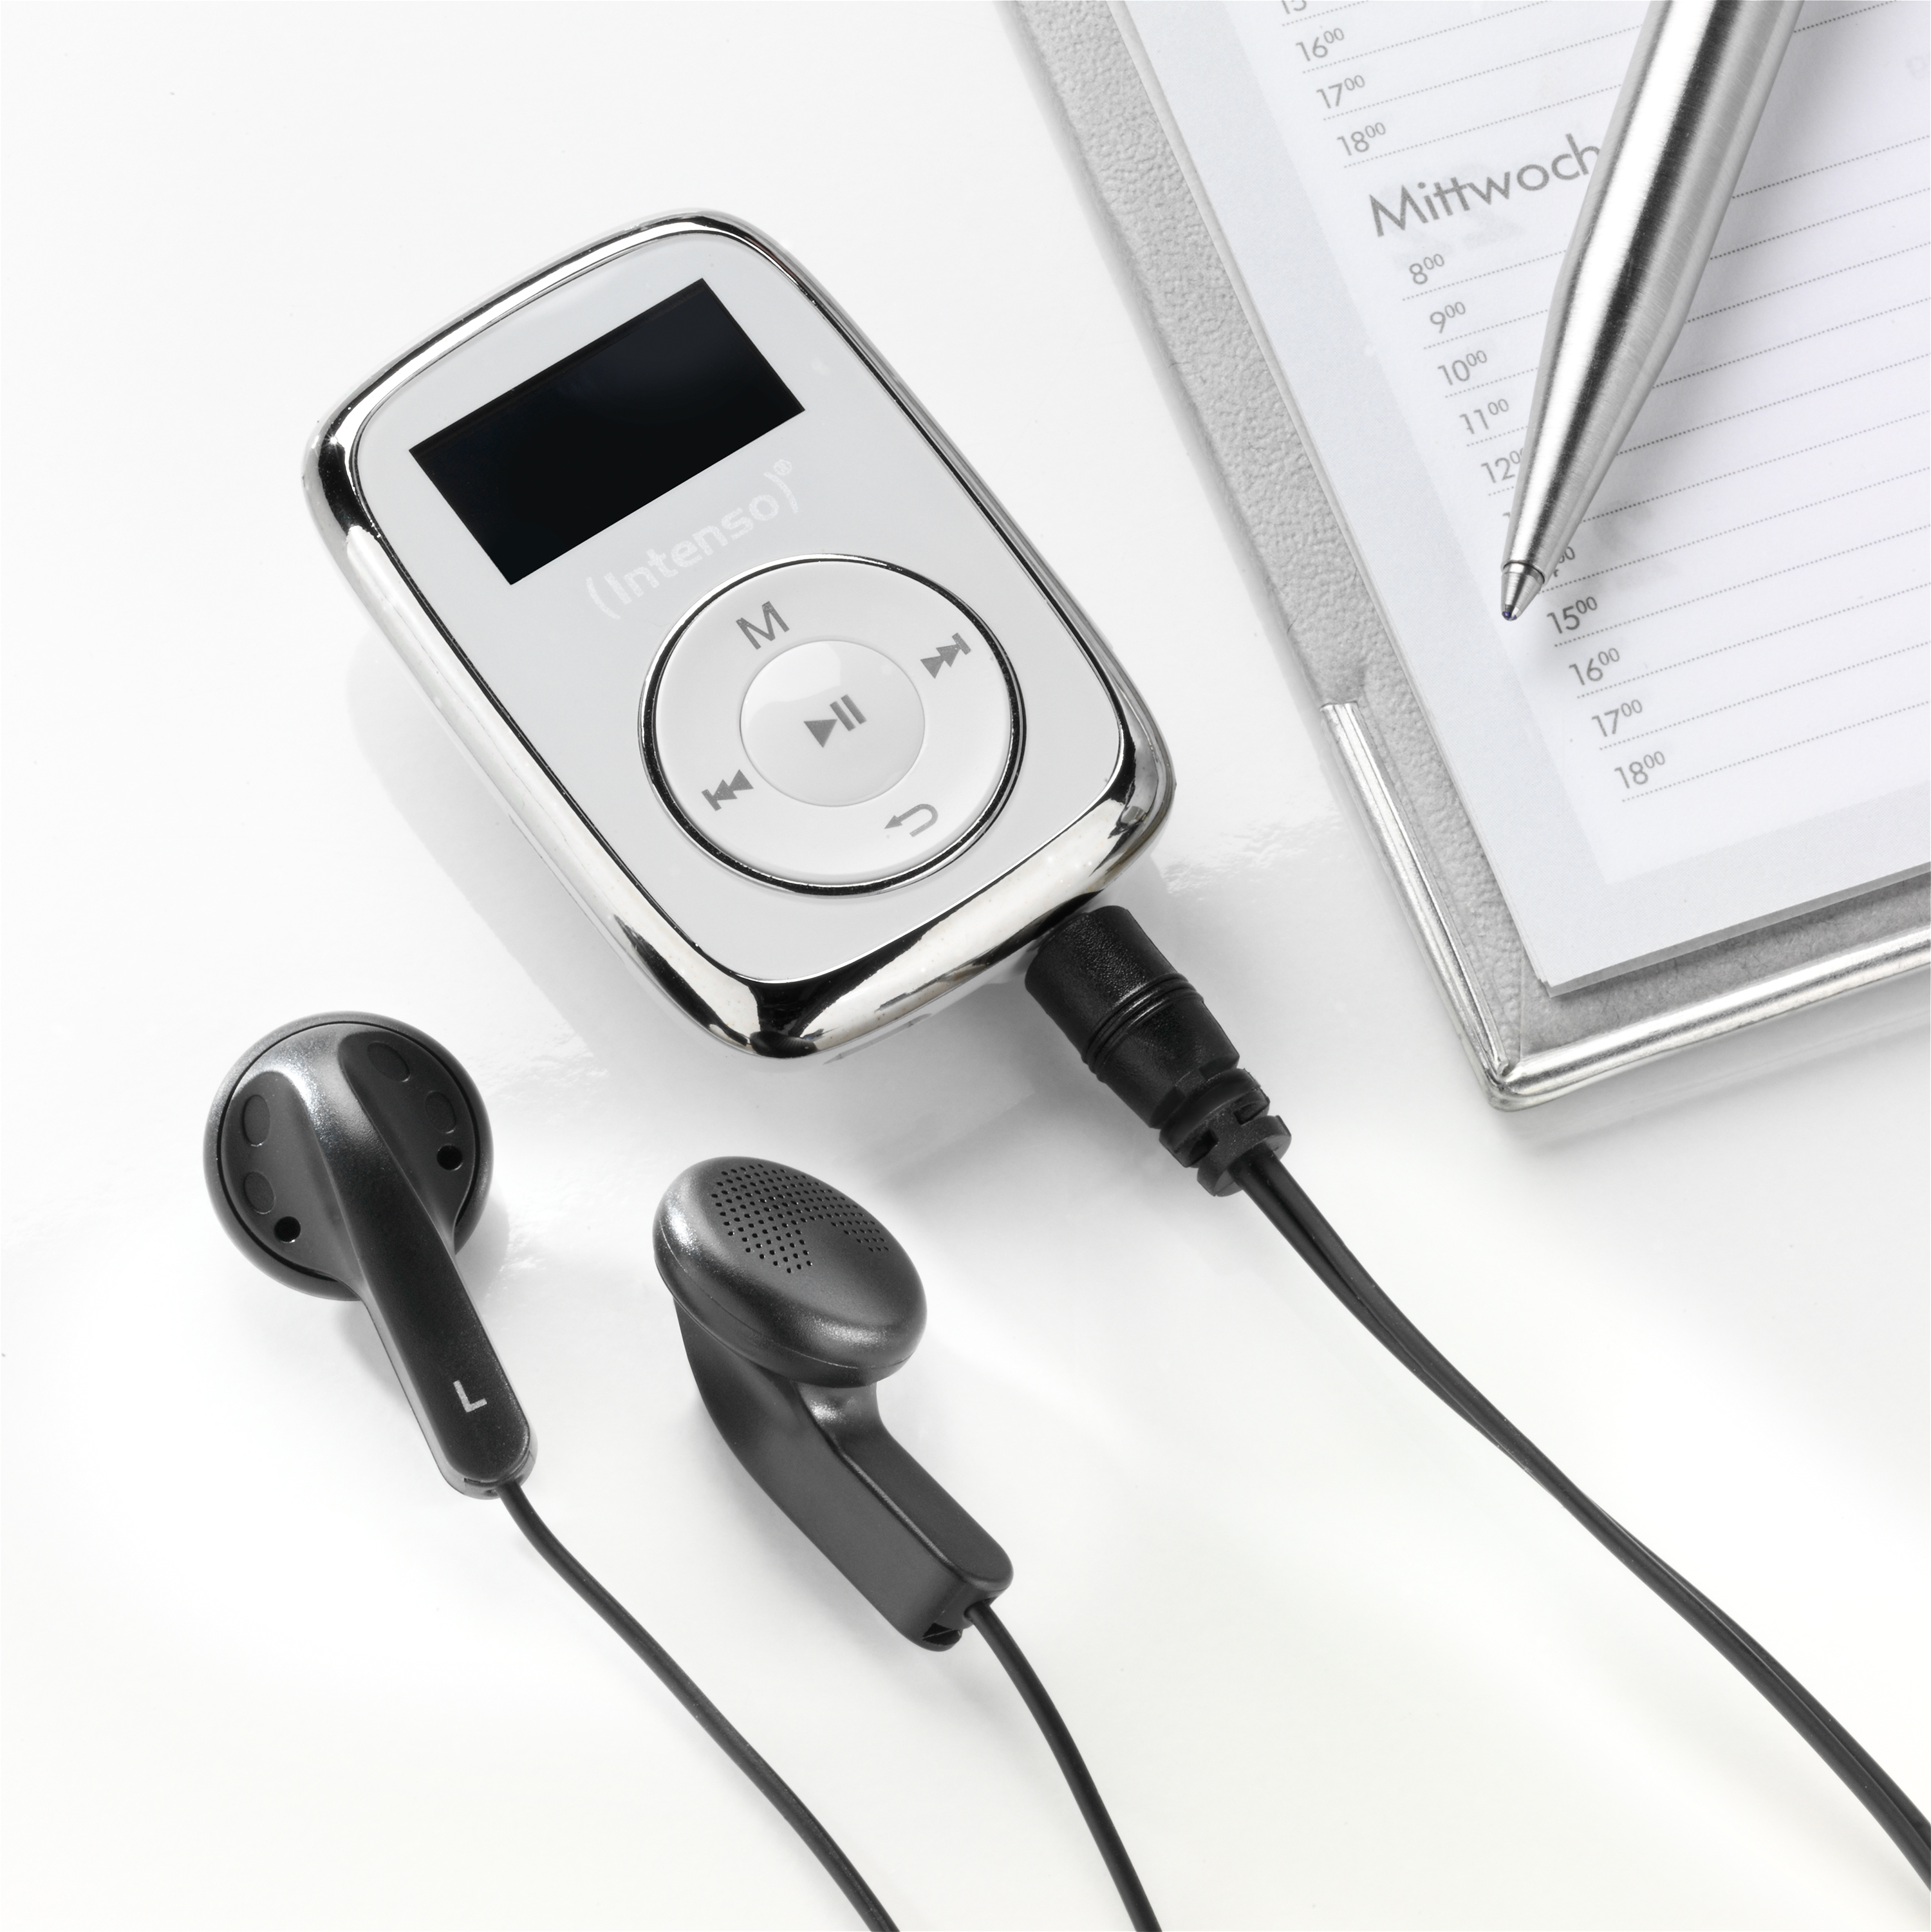 (8 GB, Mp3-Player Weiß) INTENSO Mover Music